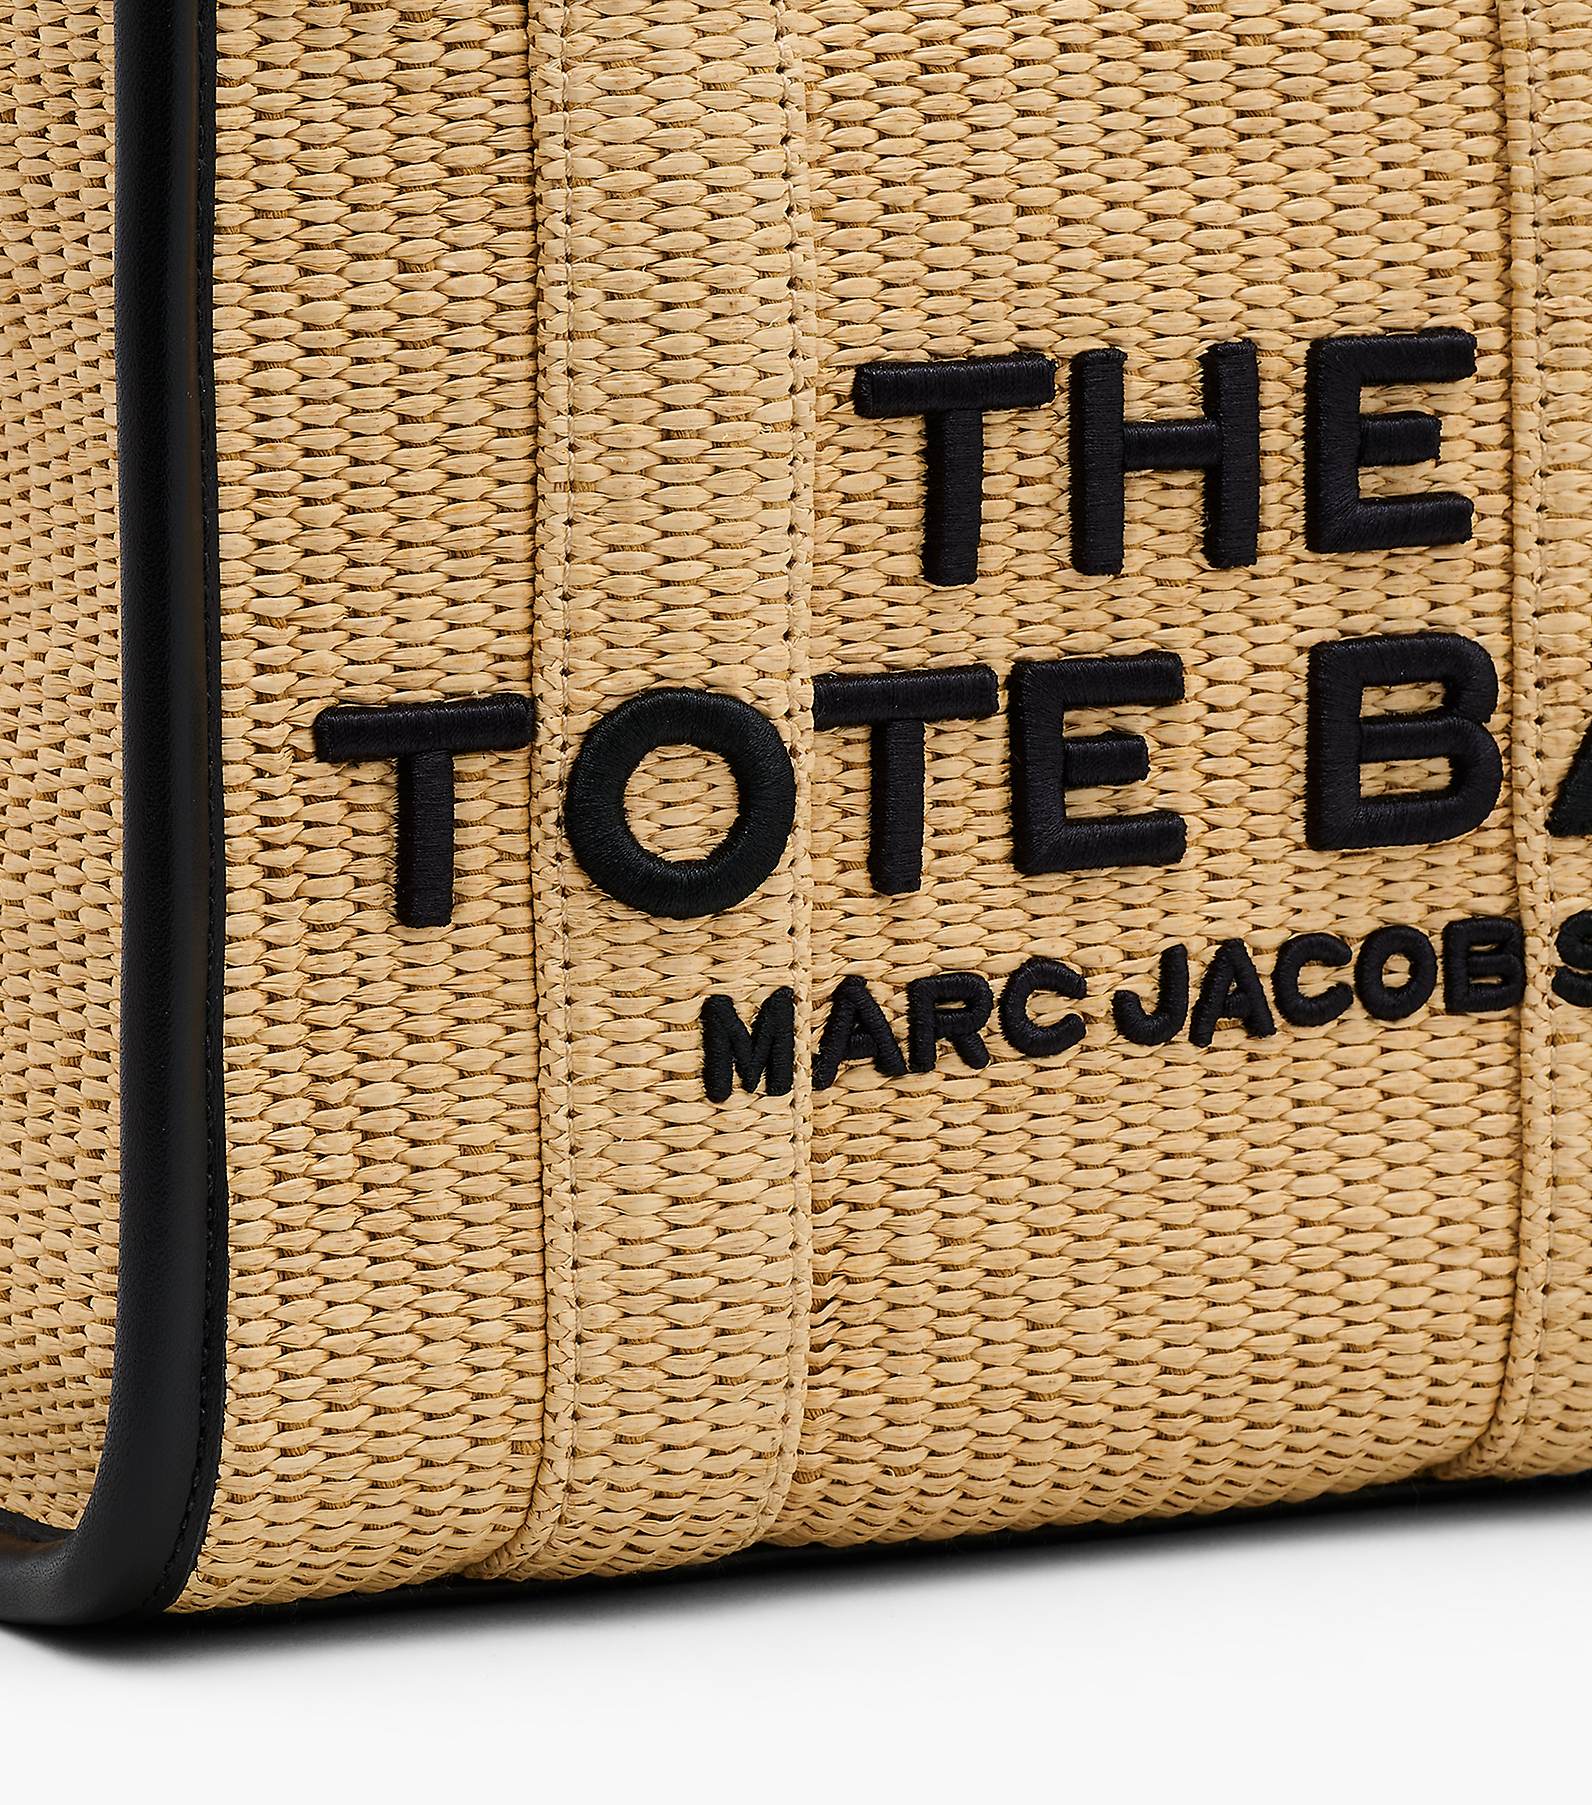 The Woven Small Tote Bag(null)